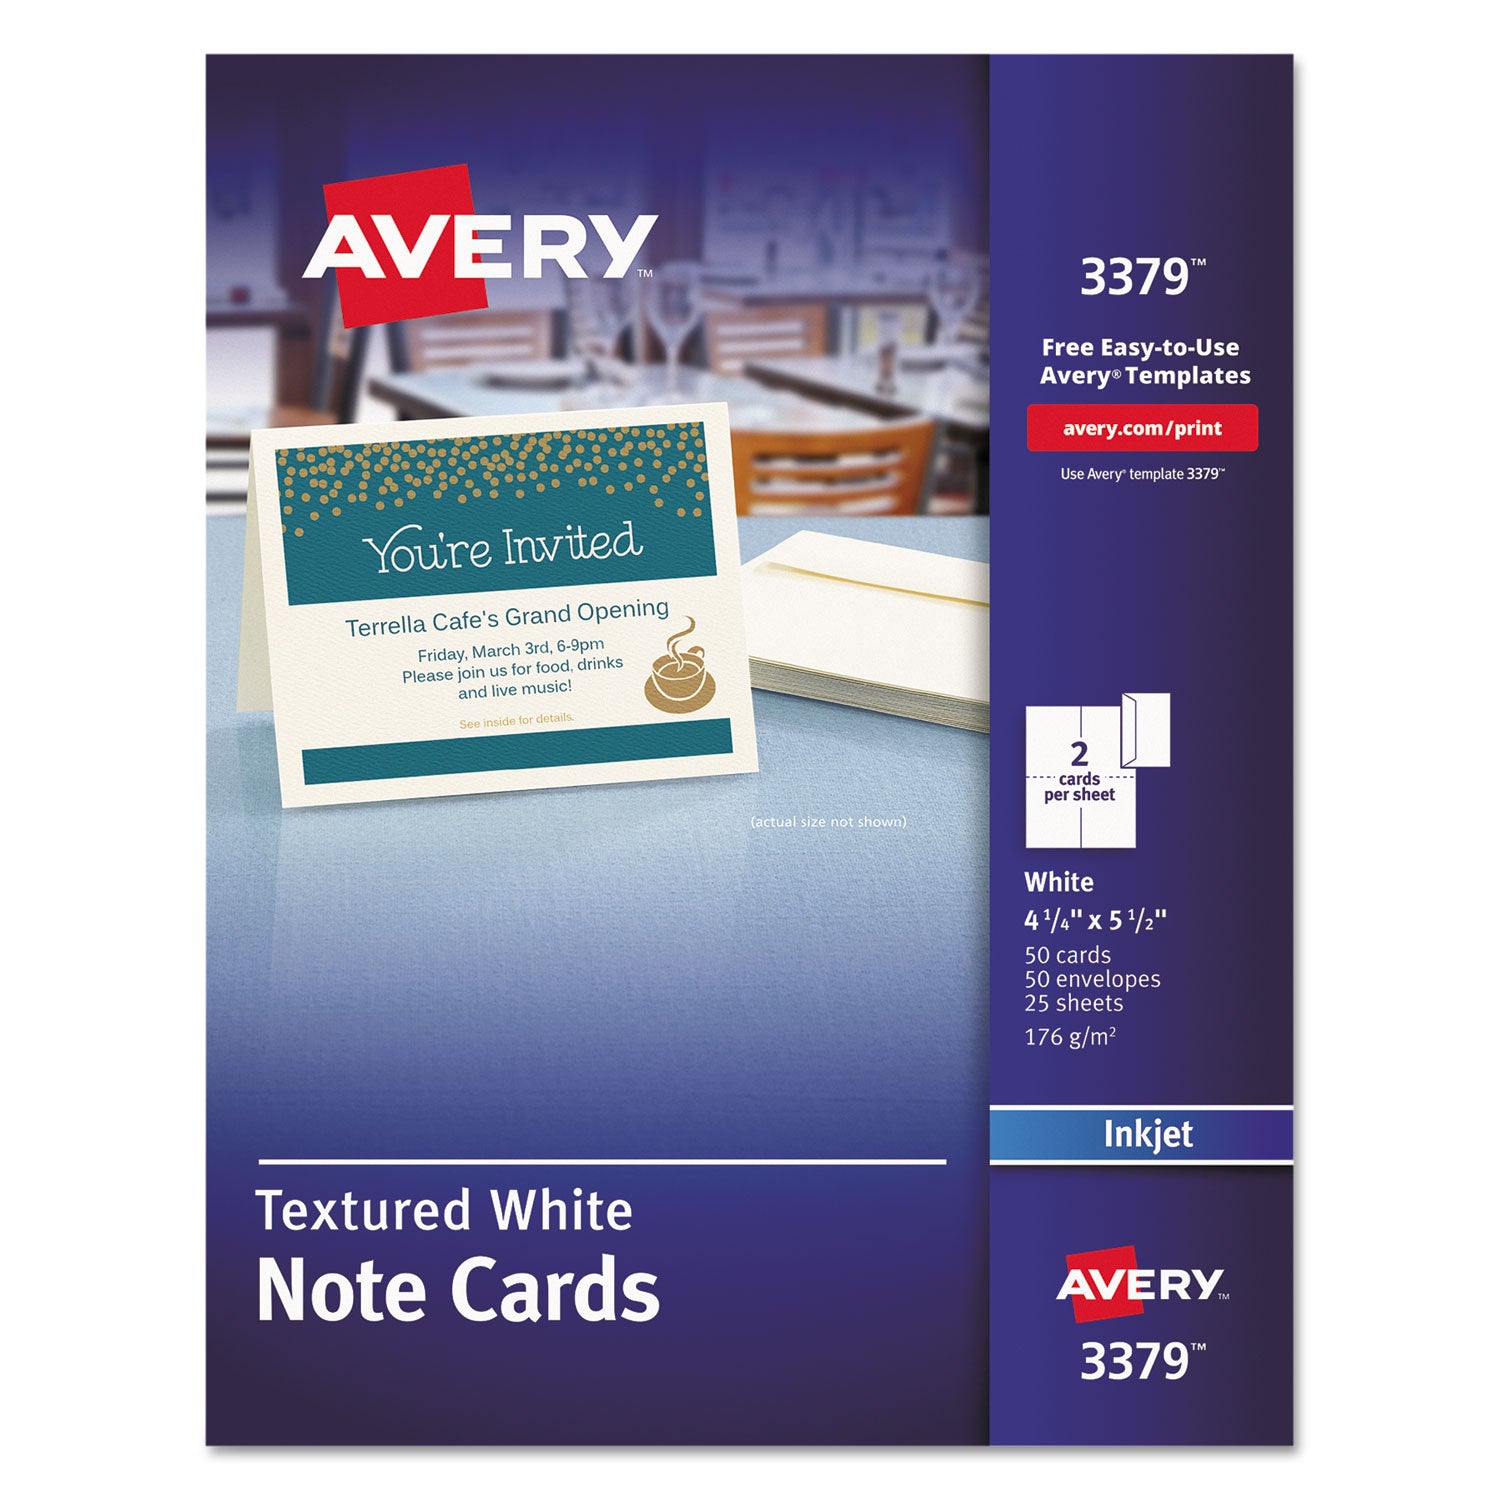 Note Cards with Matching Envelopes, Inkjet, 65lb, 4.25 x 5.5, Textured Uncoated White, 50 Cards, 2 Cards/Sheet, 25 Sheets/Box - 